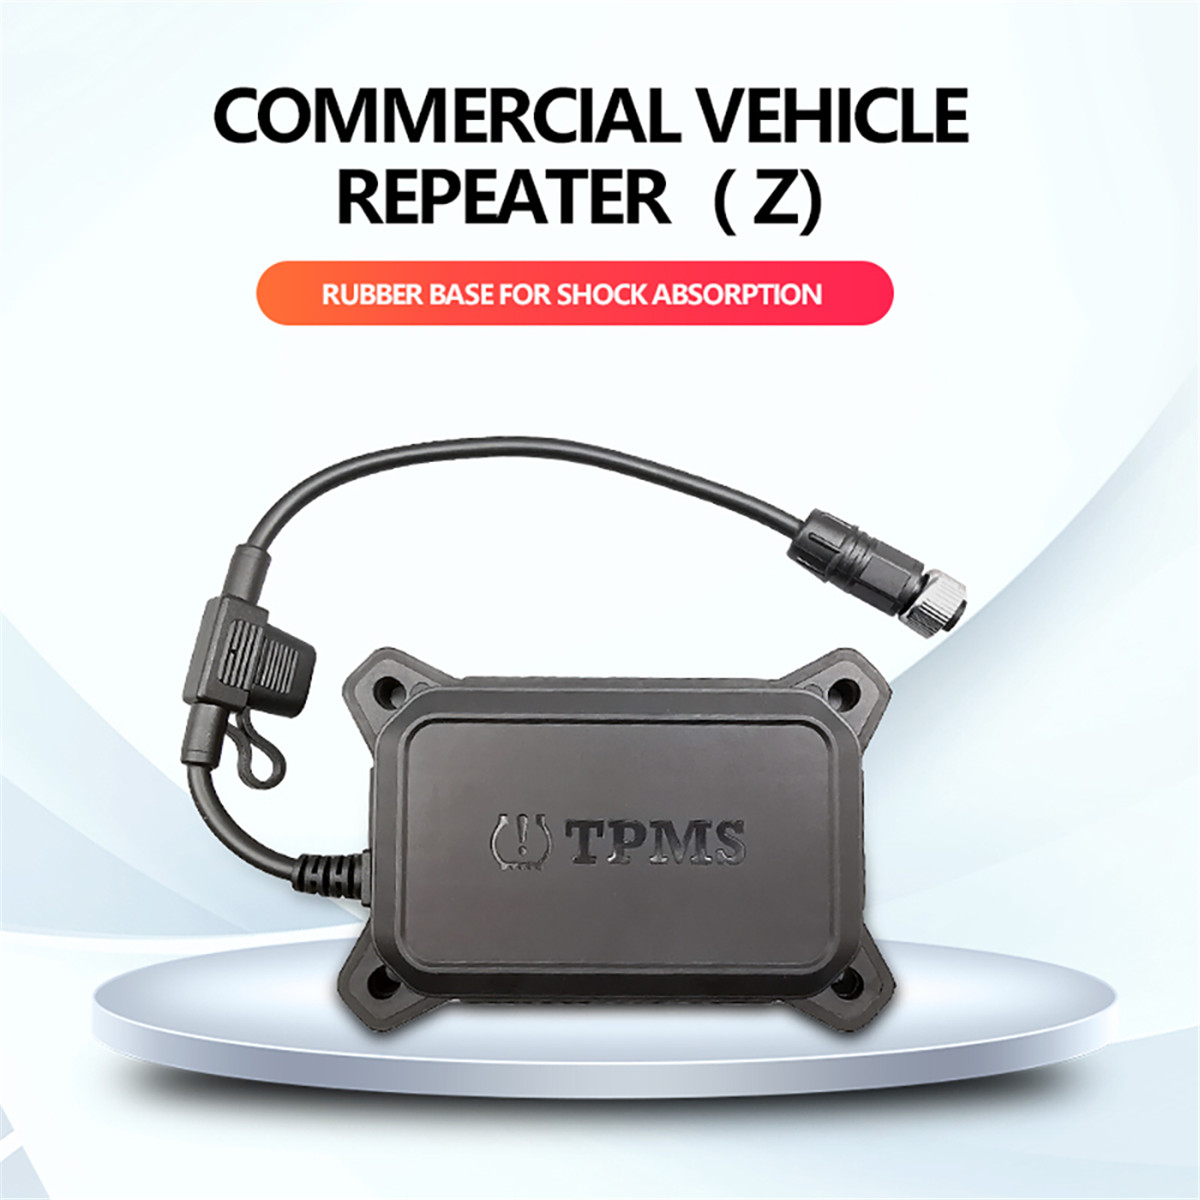 Commercial vehicle repeater01 (11)